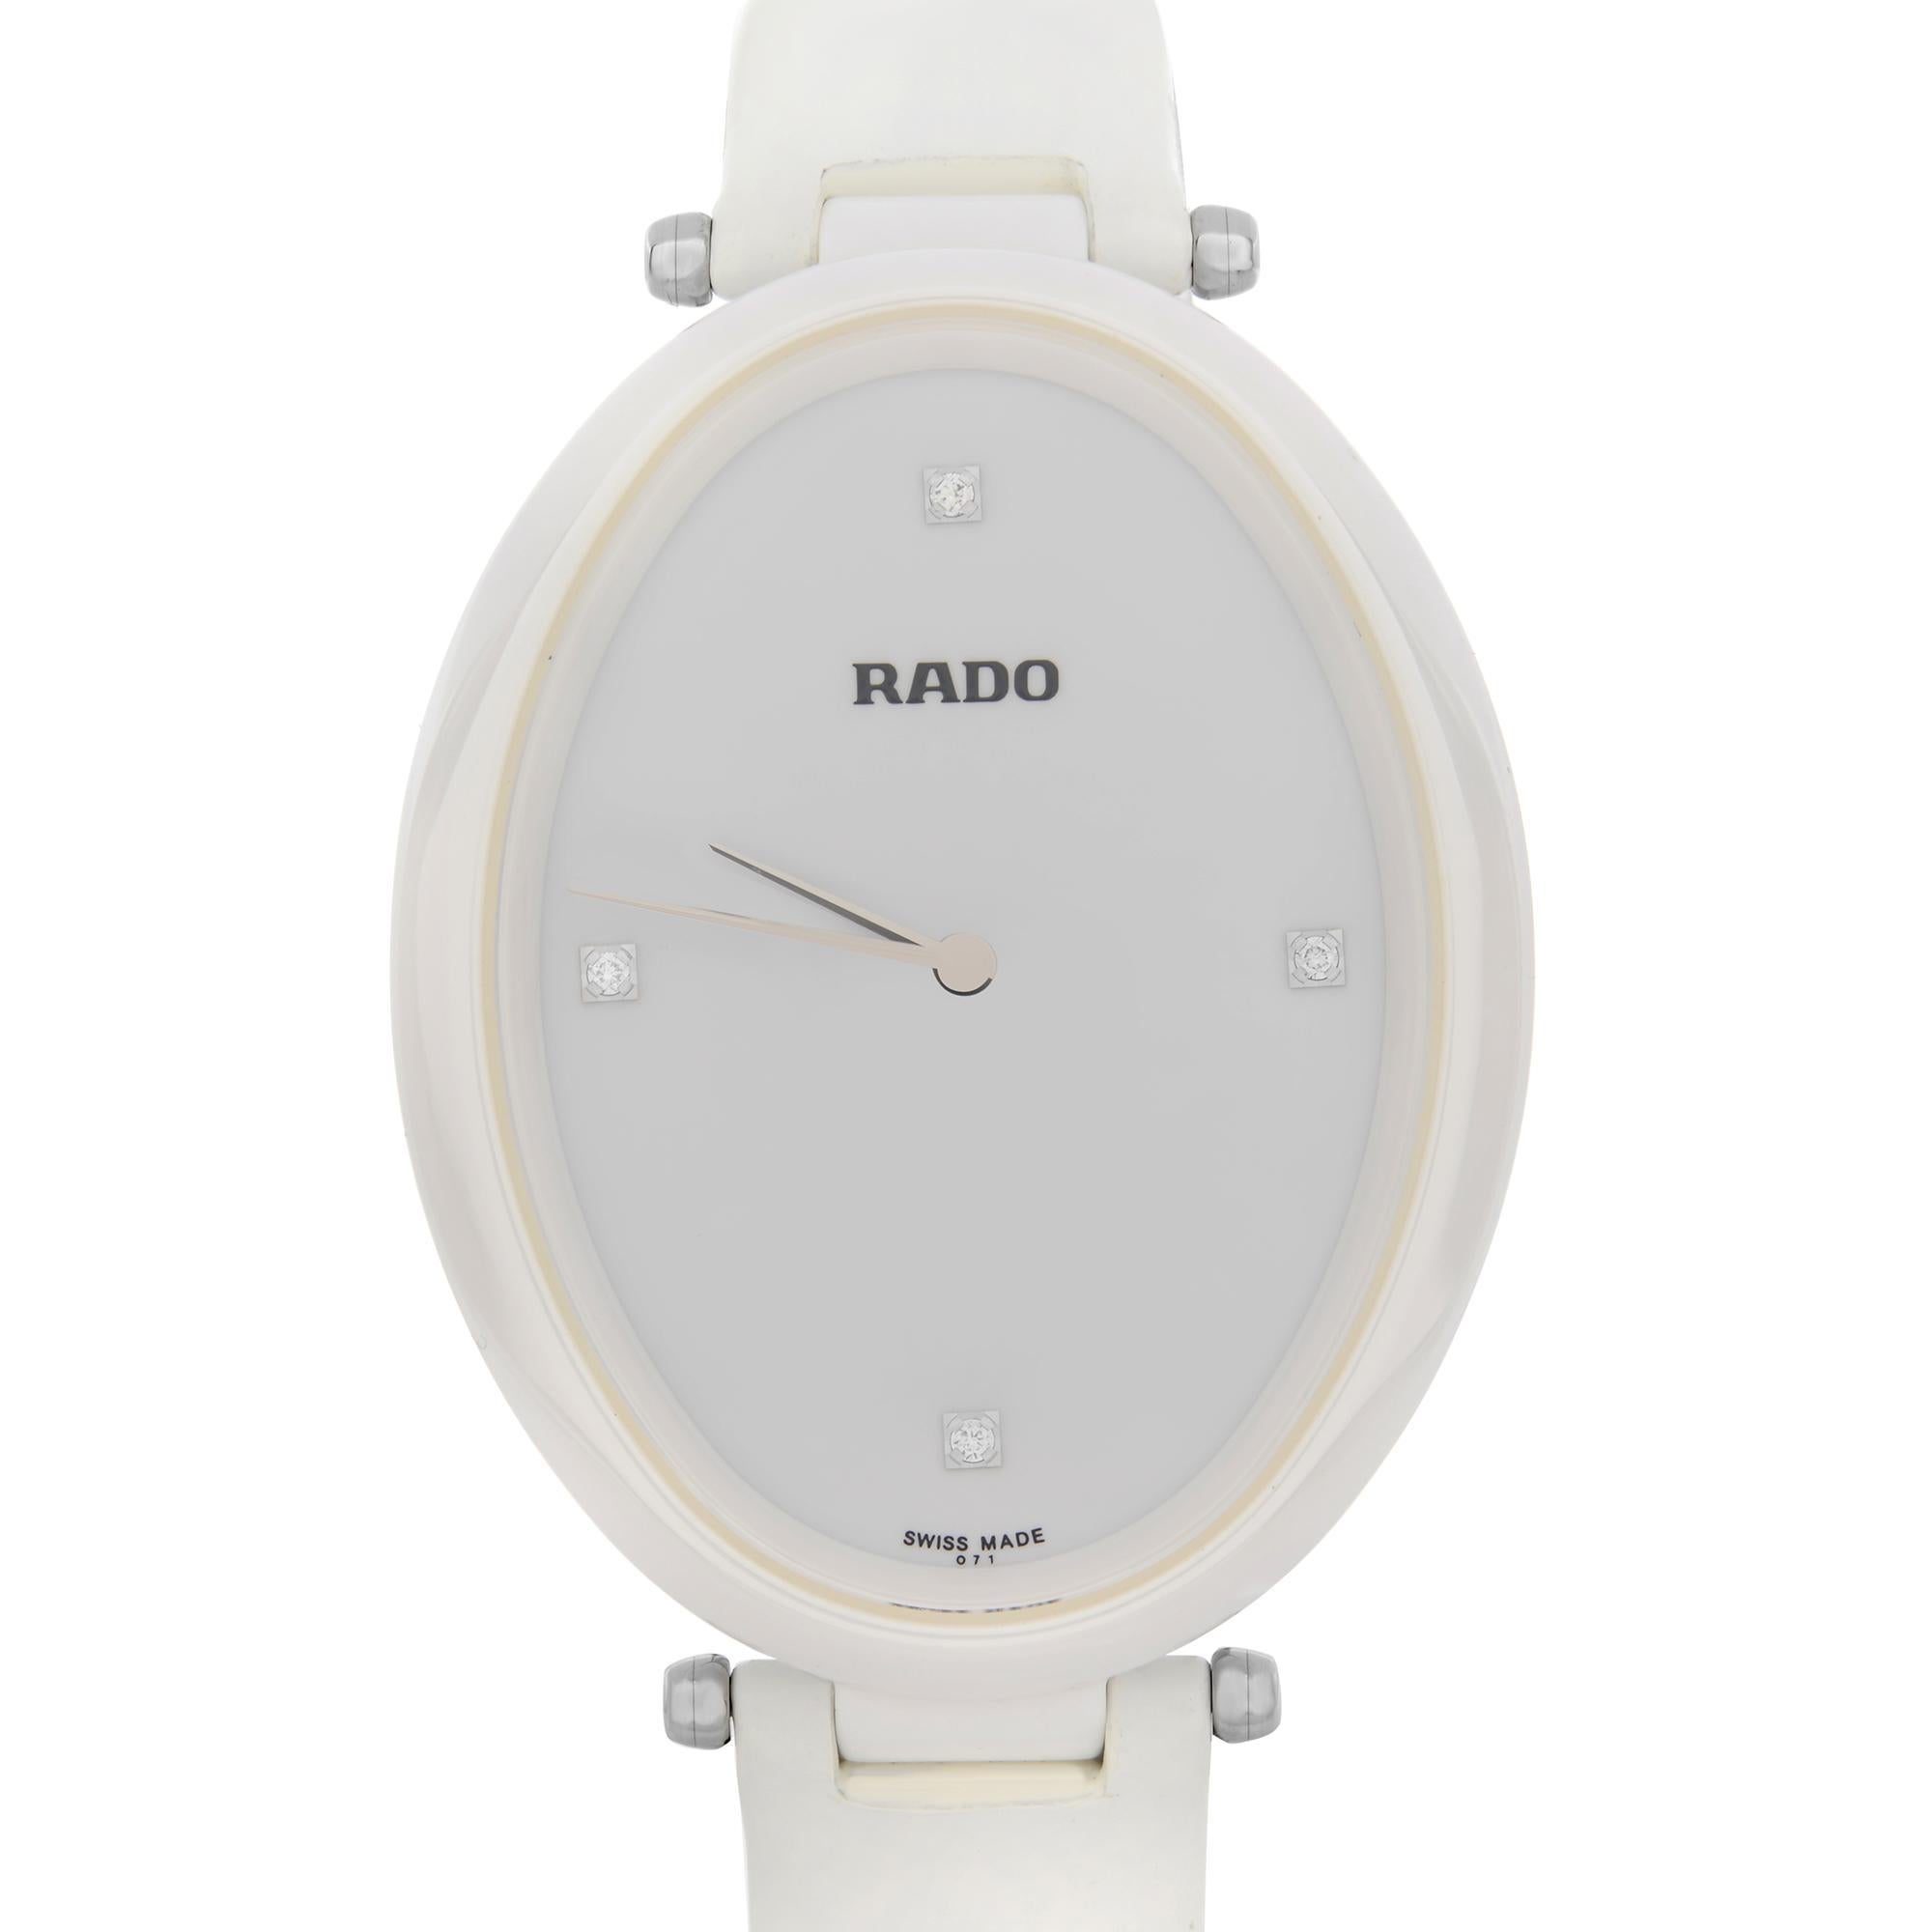 New with Defects Rado Essenza Ceramic Leather White Diamond Dial Ladies Quartz Watch R53092715. Minor Blemish and Damages around Adjustable Holes on the Leather Strap during handling and display. This Ladies Timepiece is Powered by a Quartz